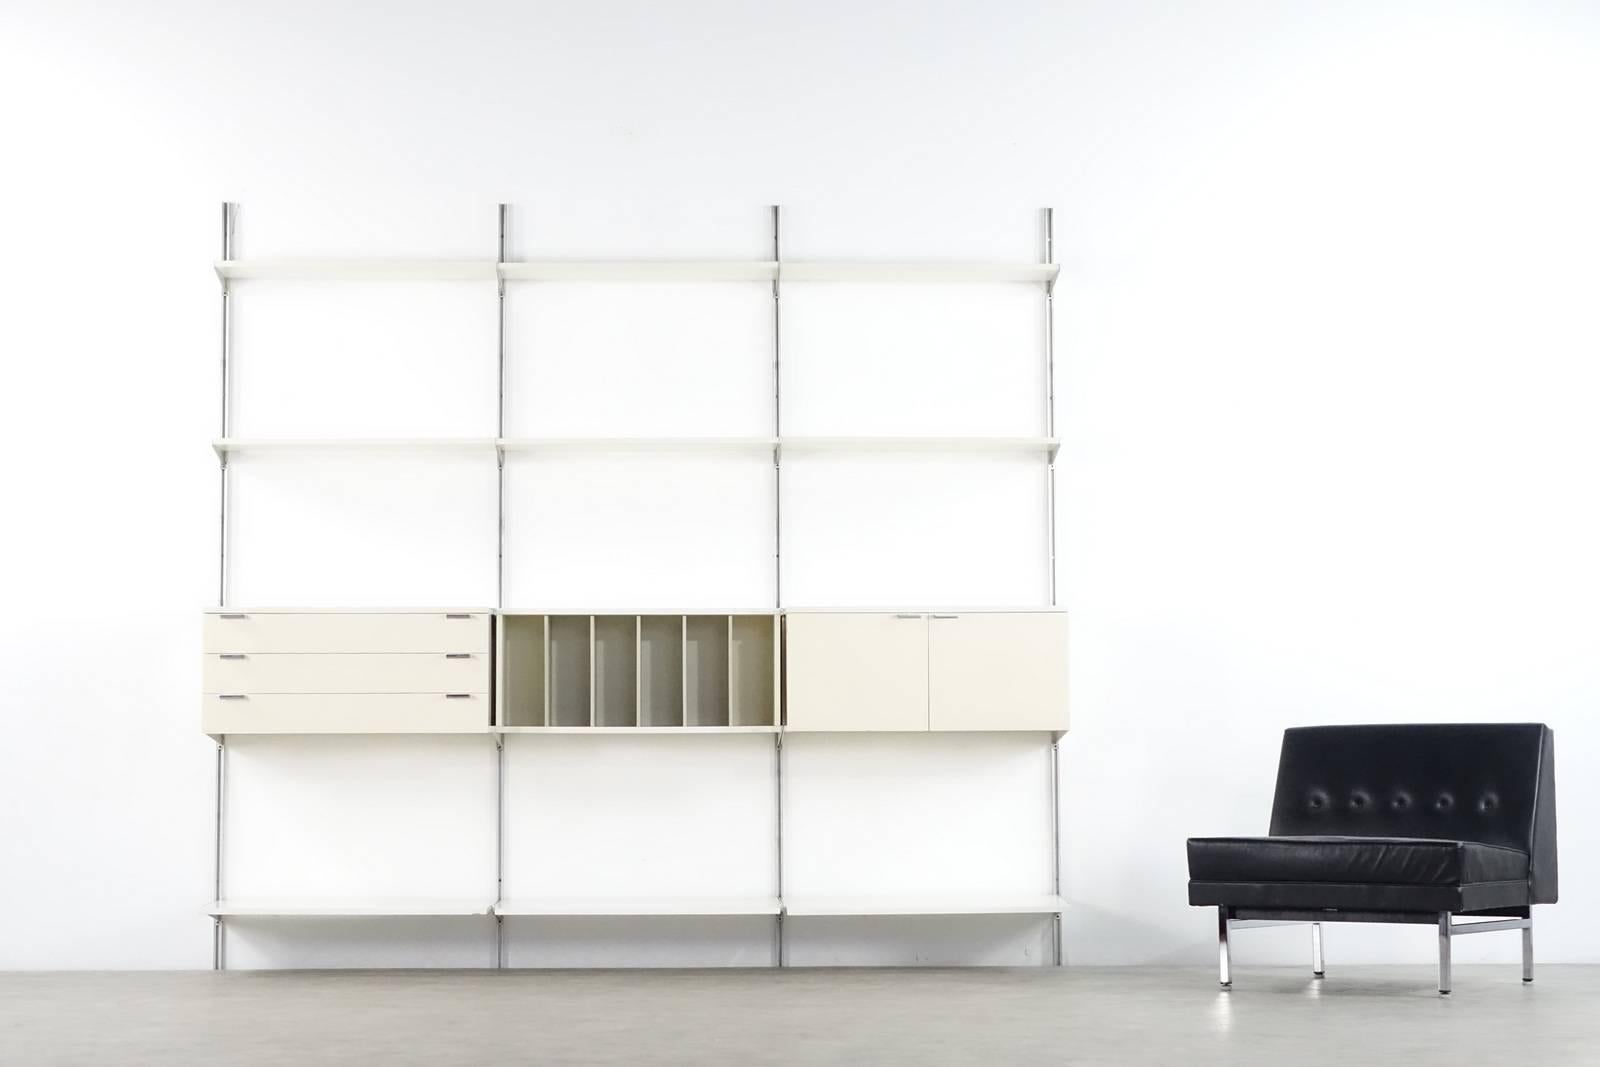 VERY RARE GEORGE NELSON CSS WALL UNIT FOR HERMANN MILLER 1959

CSS (Comprehensive Storage System) off white modular wall unit or room divider designed by George Nelson for Herman Miller 1957 edited between 1959 till 1973. 

4 wall bars 2.35m